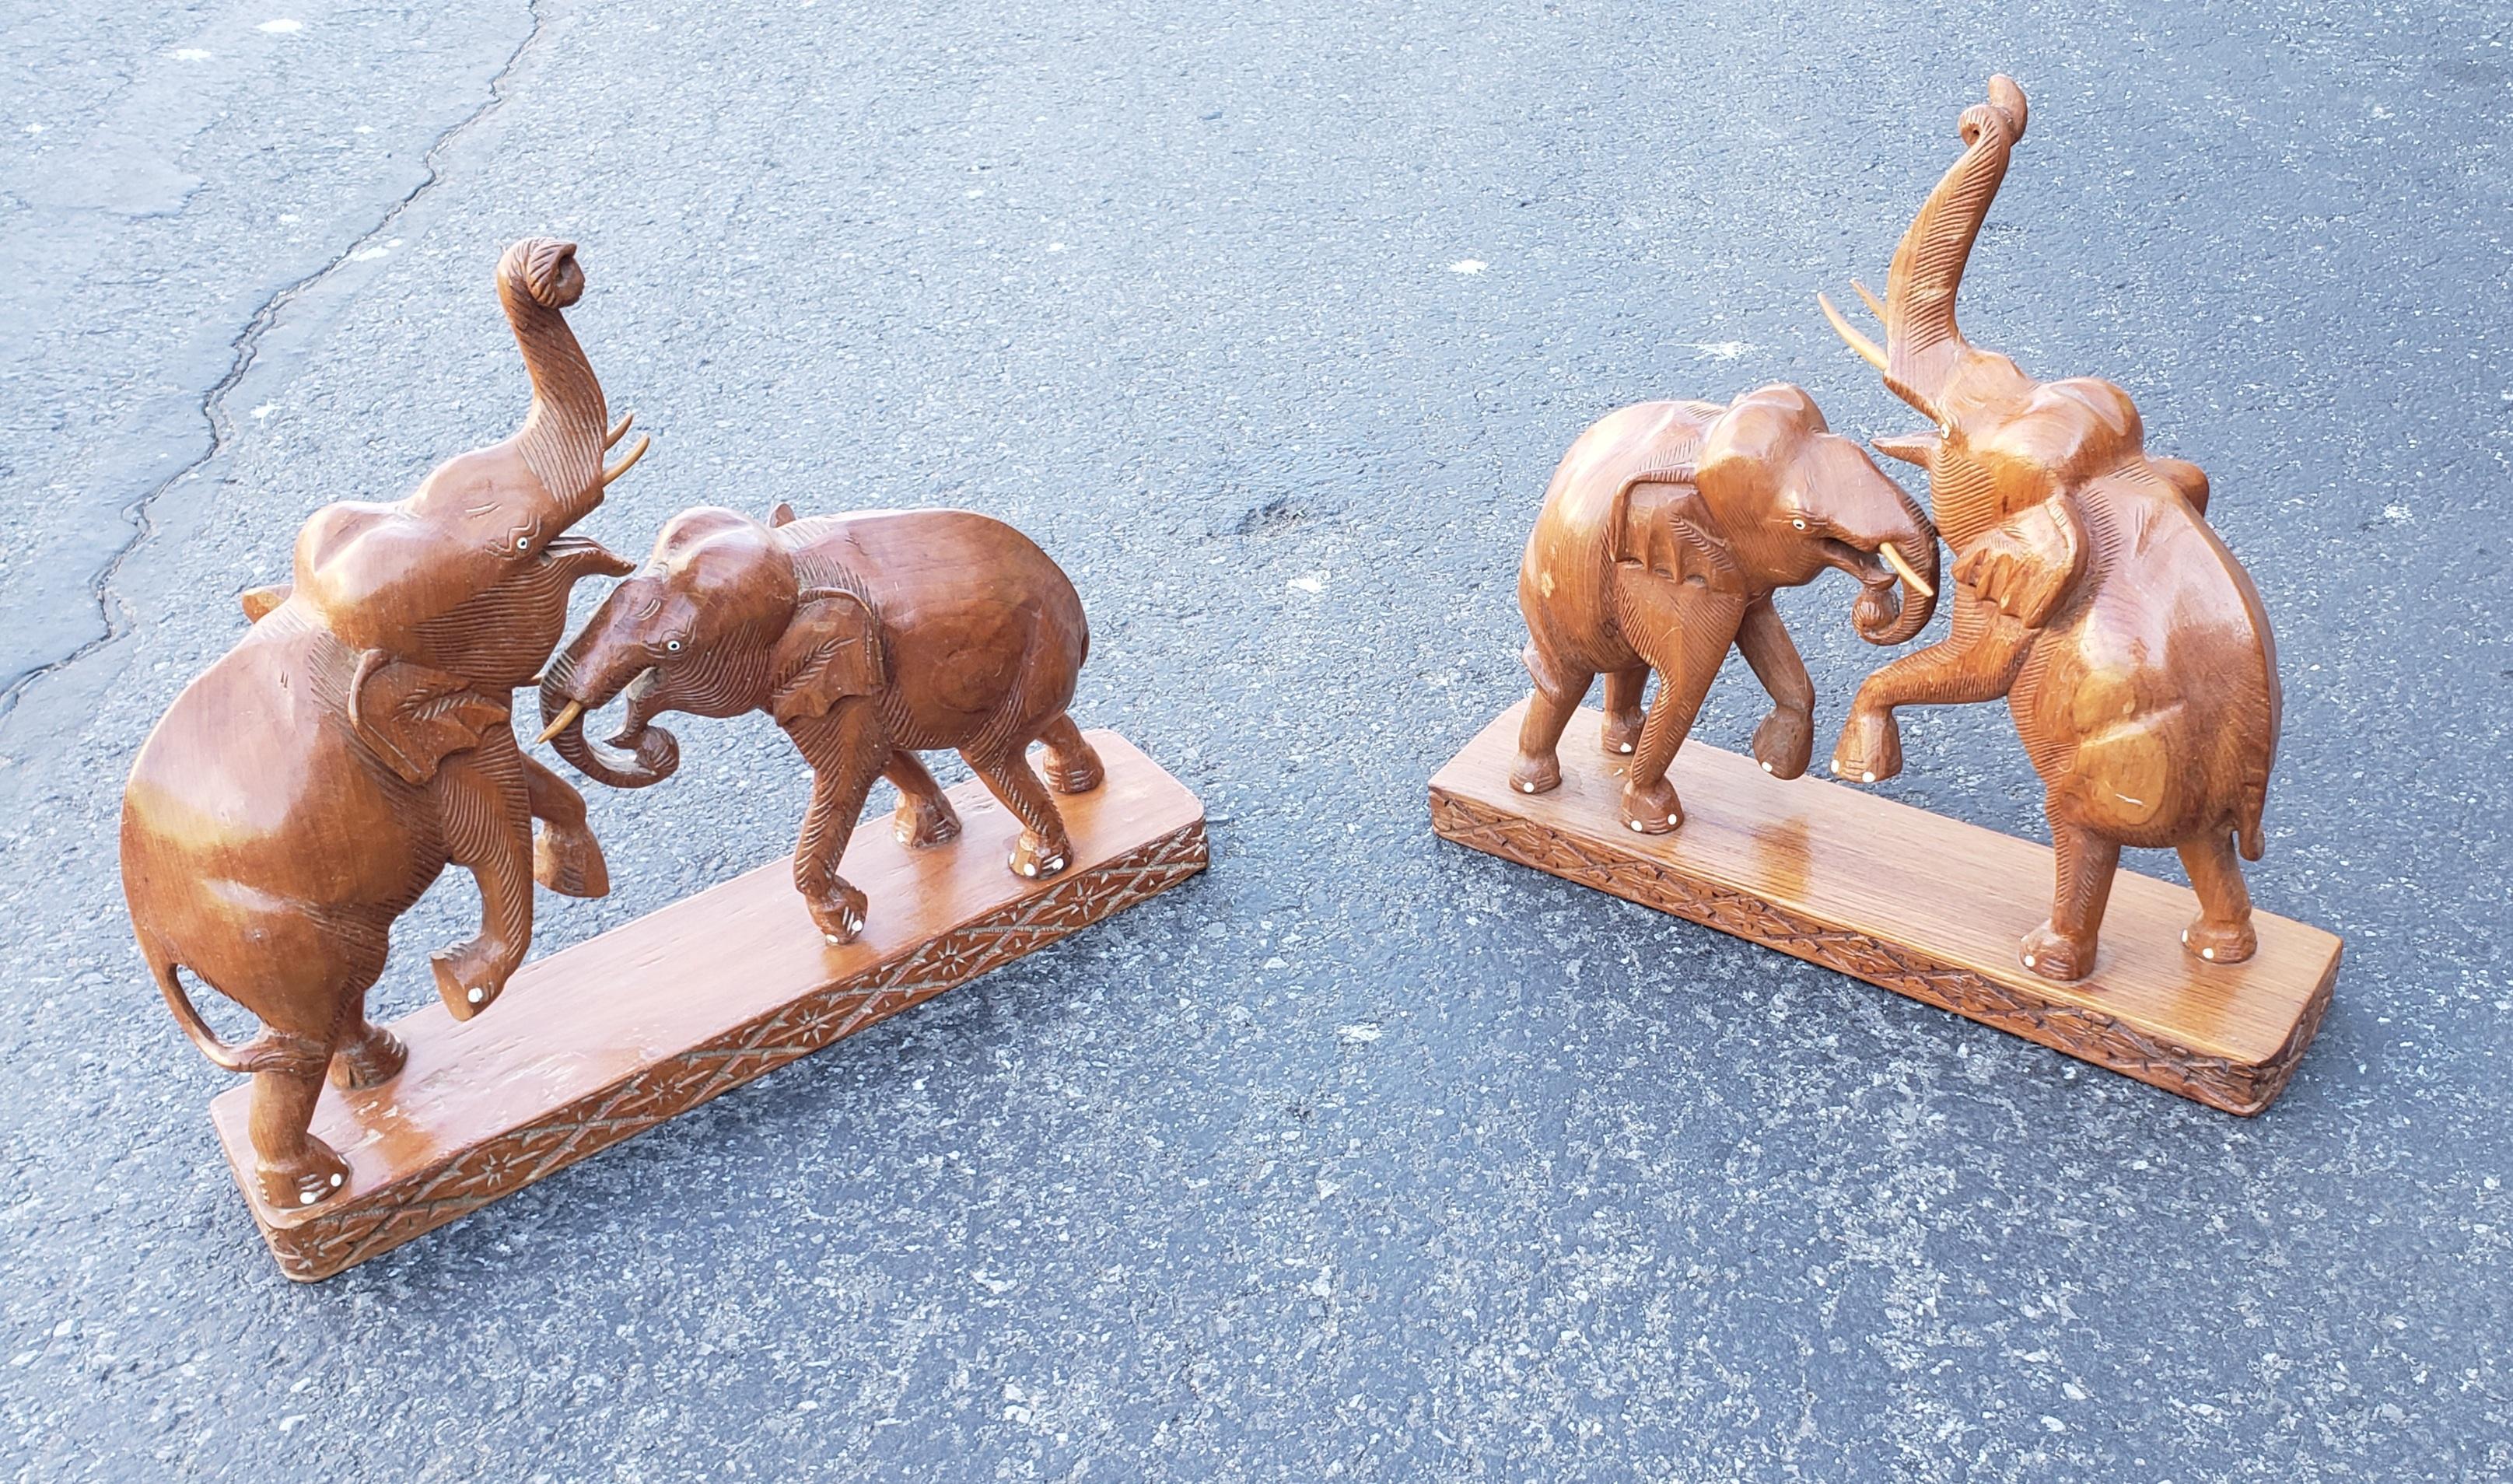 handcrafted fruitwood elephant figurals in good vintage condition.
Measures 18 inches in width, 4.25